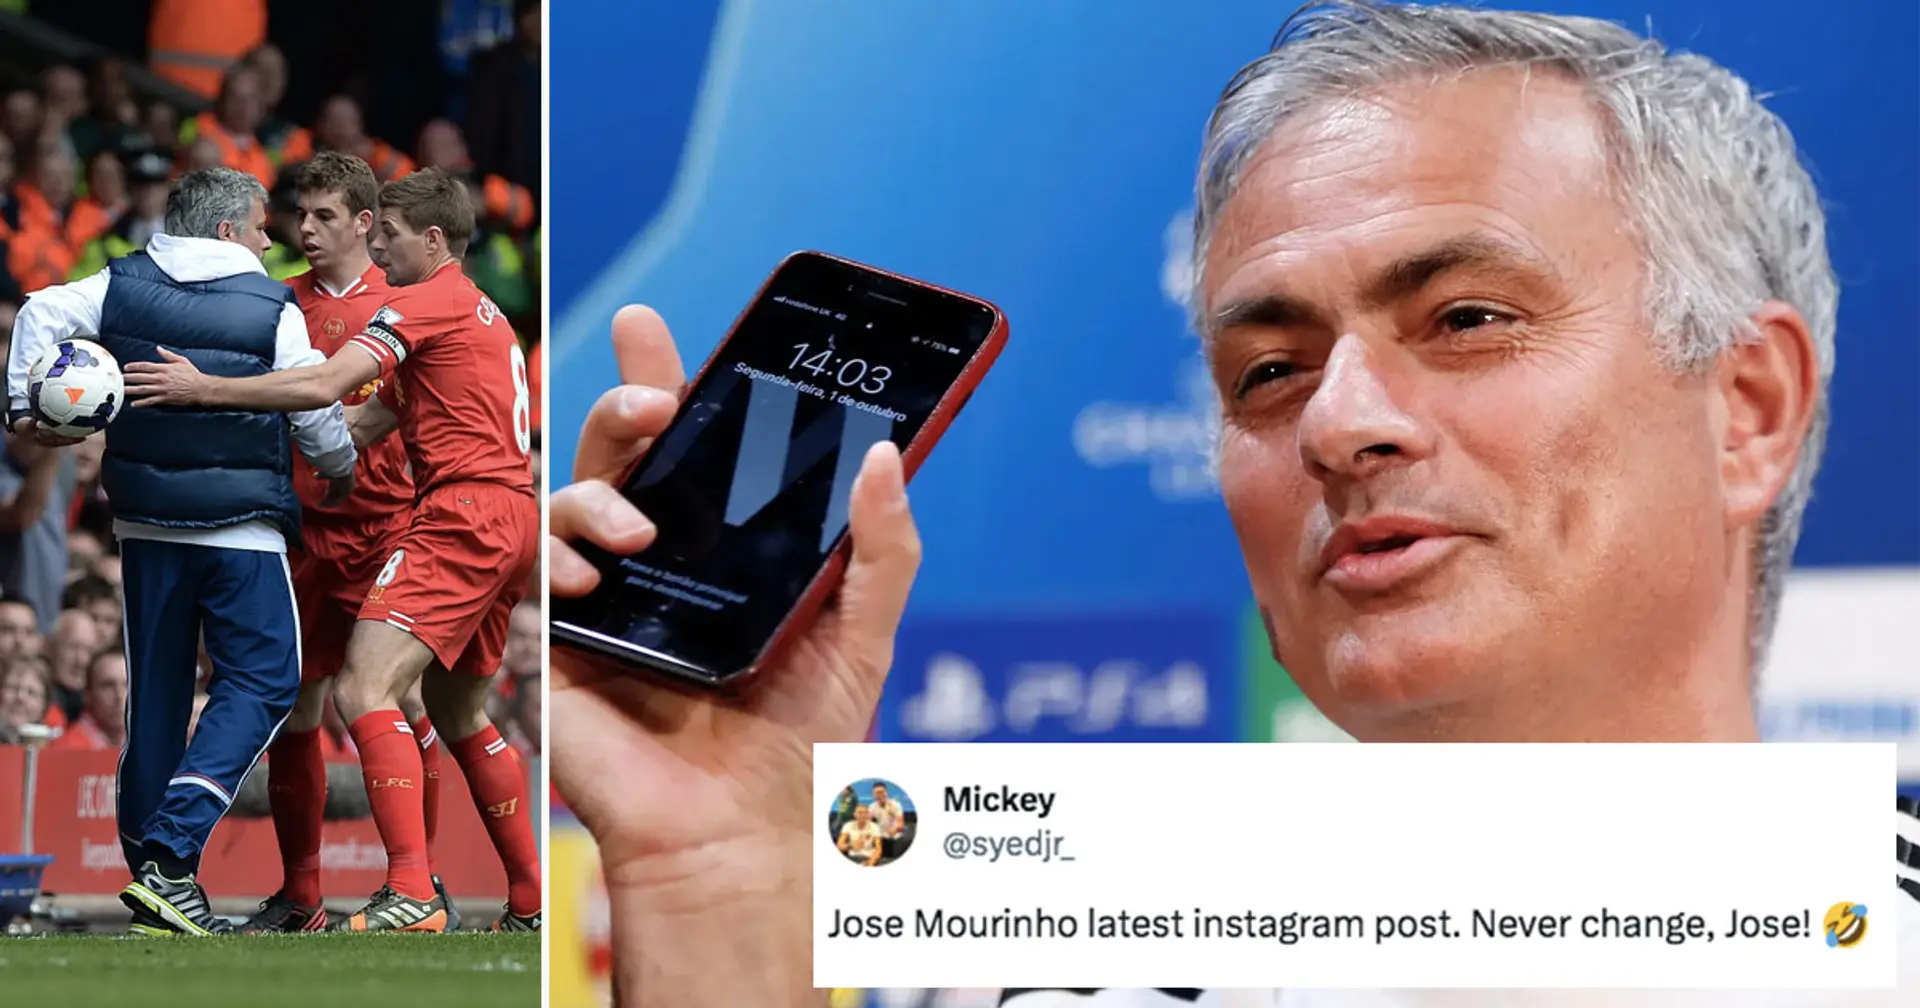 Recalling 'GOATed' moment when Man United fans fell in love with Mourinho - he already left by that time